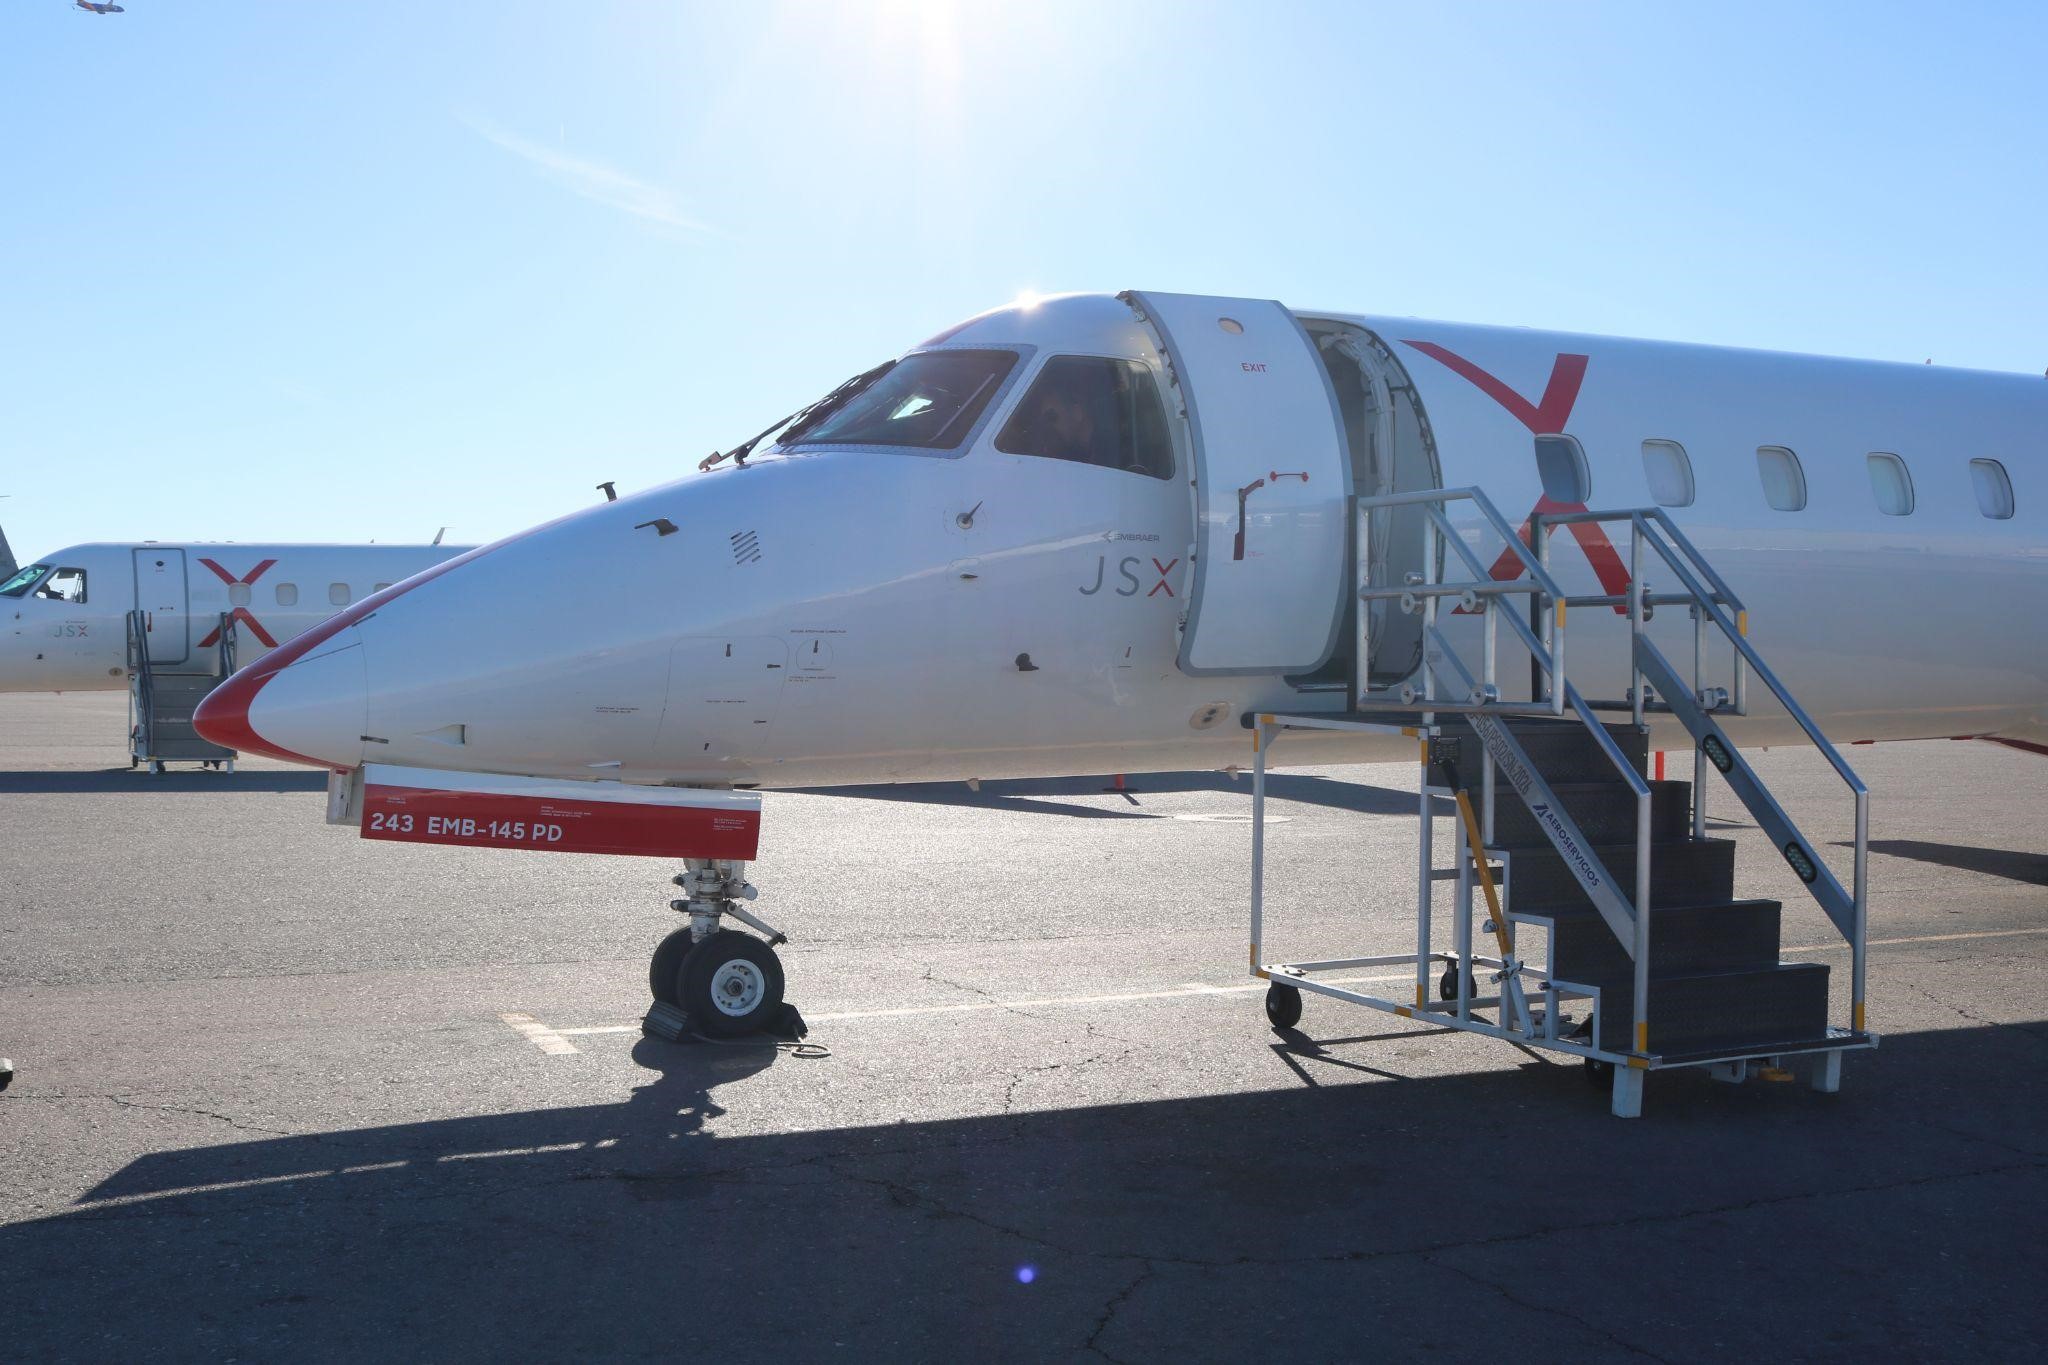 A JSX Embraer ERJ-145 parked on the tarmac ready for boarding.